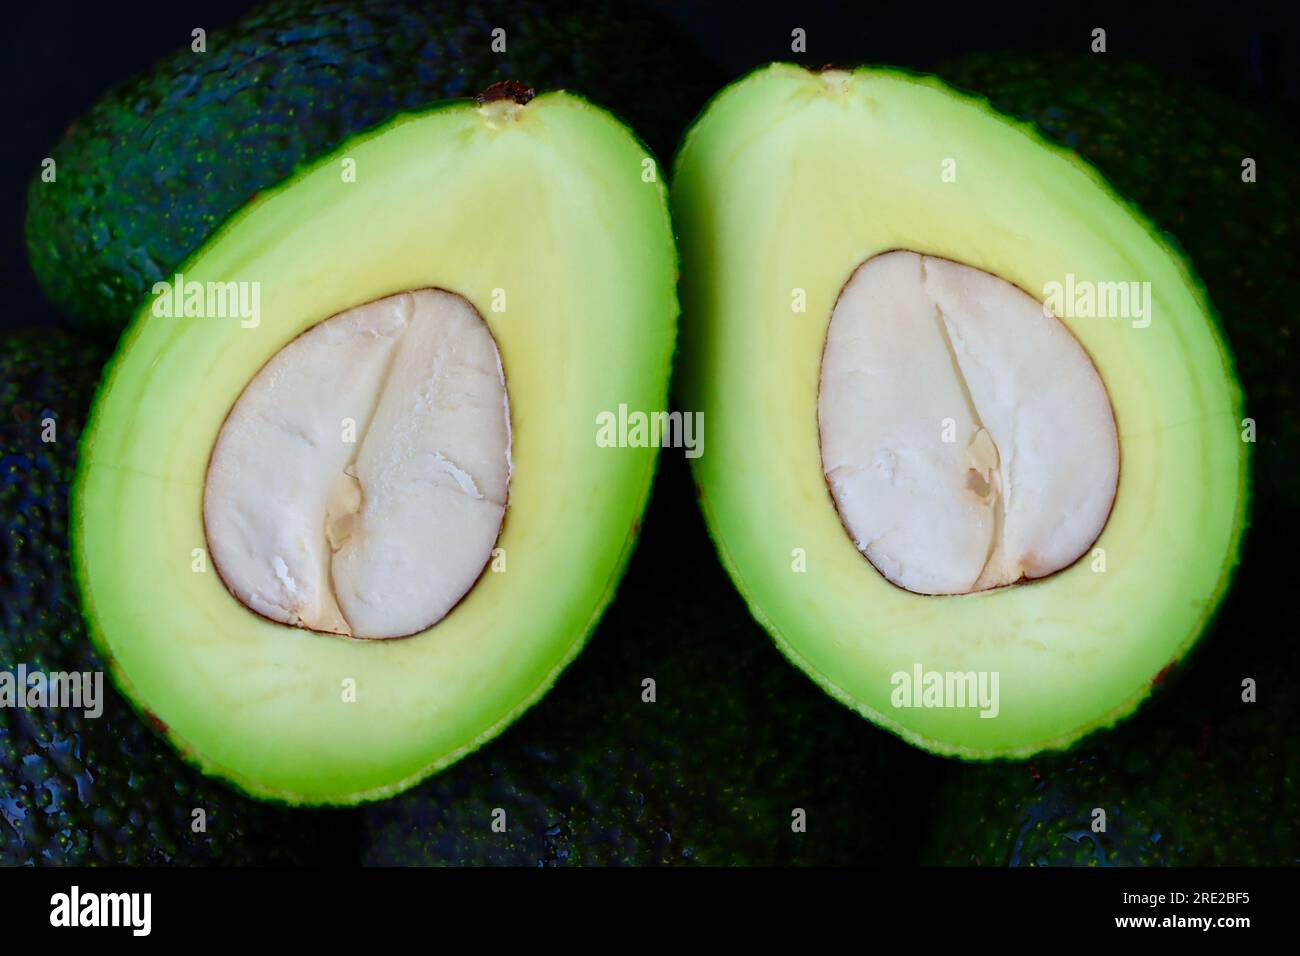 Avocado (Persea americana) cut in two through the central seed/pit/kernel. Stock Photo